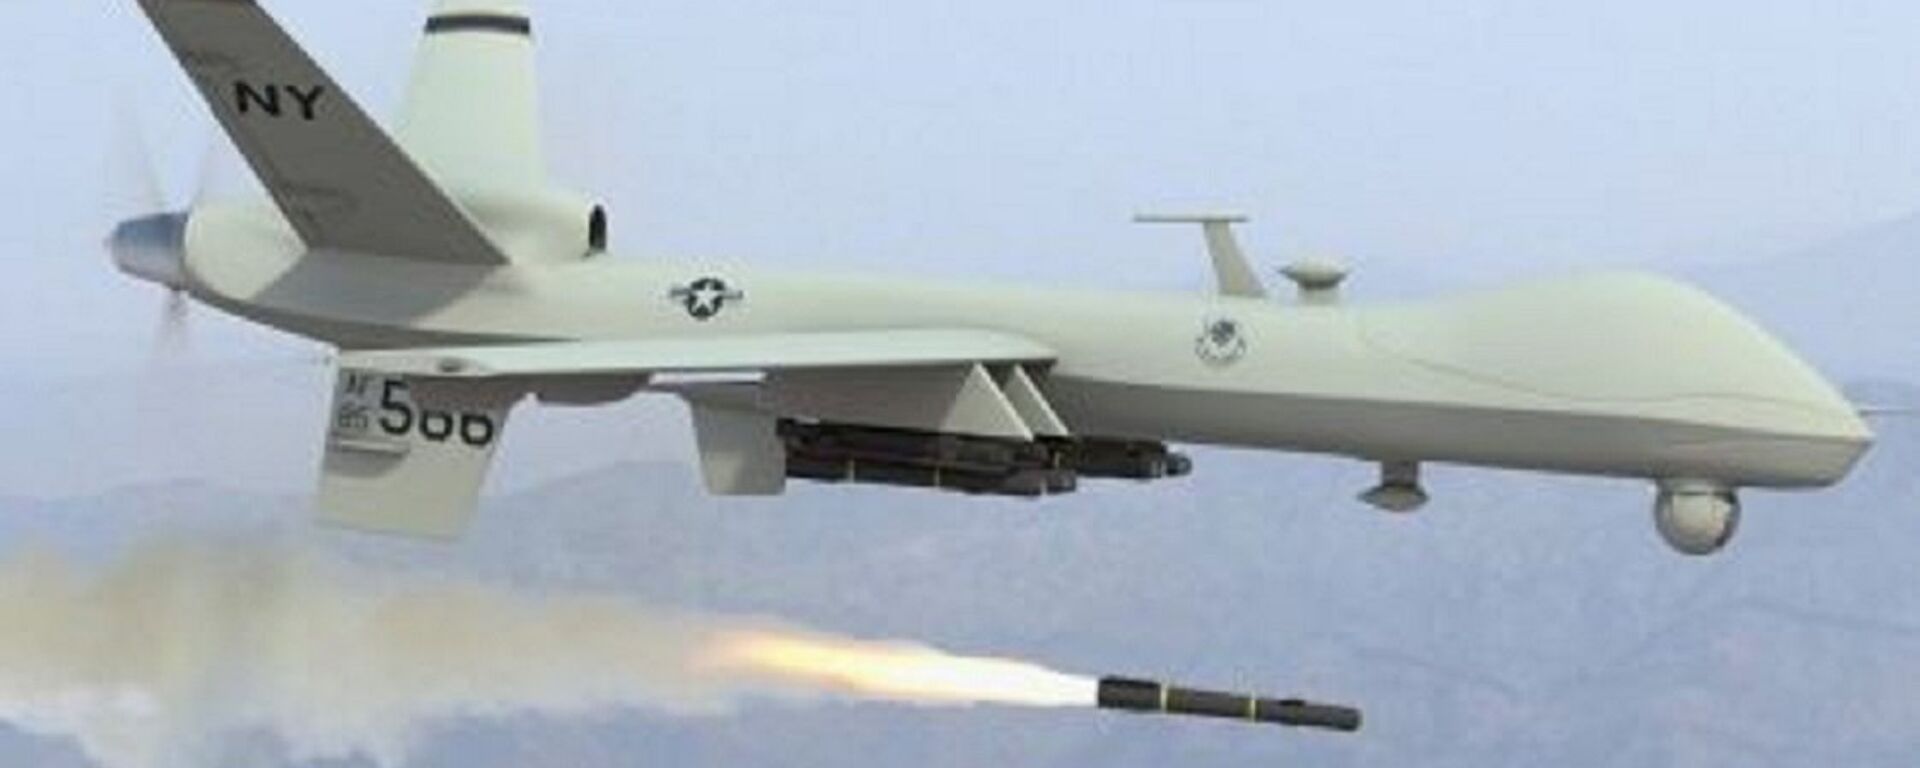 US predator drone unleashing the hellfire missile. This weapon deployed by the Central Intelligence Agency (CIA) and the Pentagon has killed thousands. The Obama administration has increased its usage in Africa, the Middle East and Central Asia. - Sputnik International, 1920, 16.05.2023